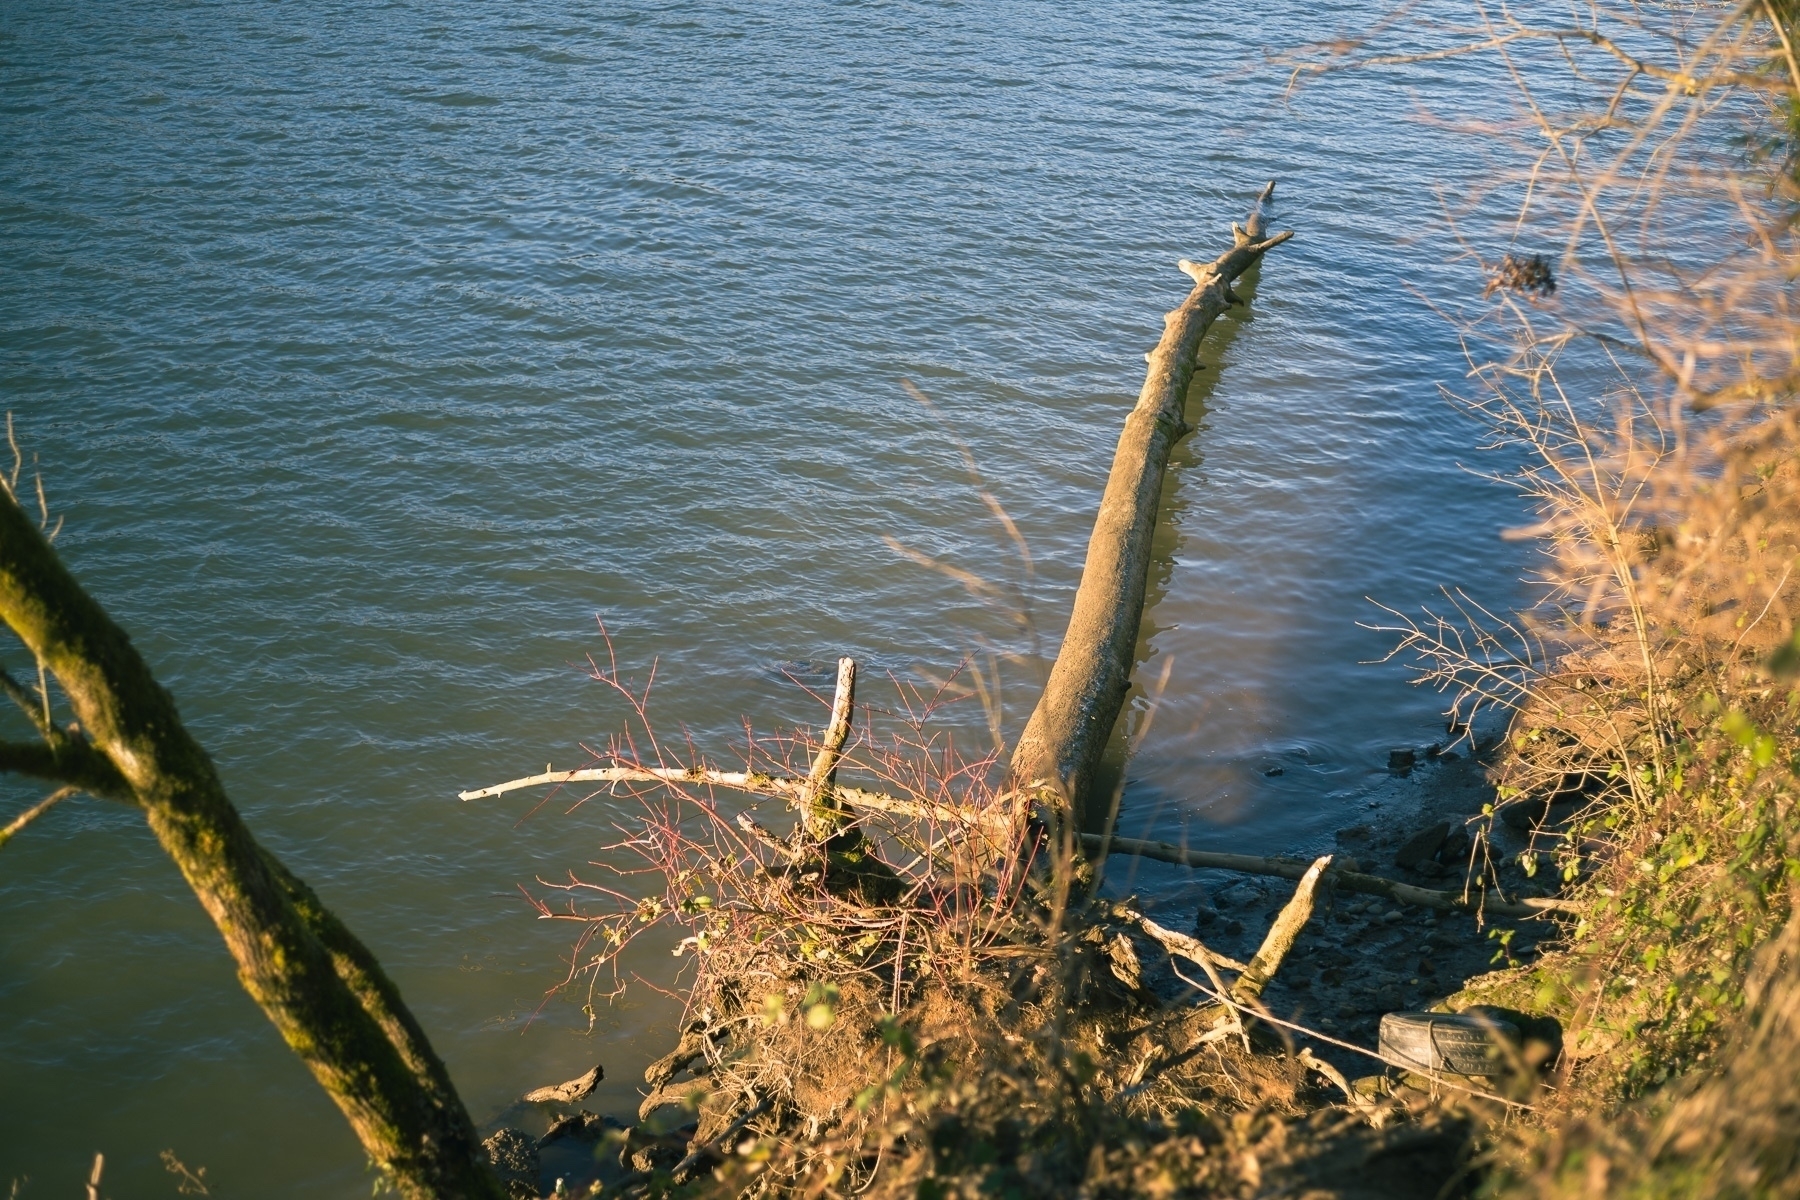 A fallen tree on the bank of a river, with its top submerged in the water and it’s base in the foreground showing roots. Lit by the low afternoon winter sunlight.